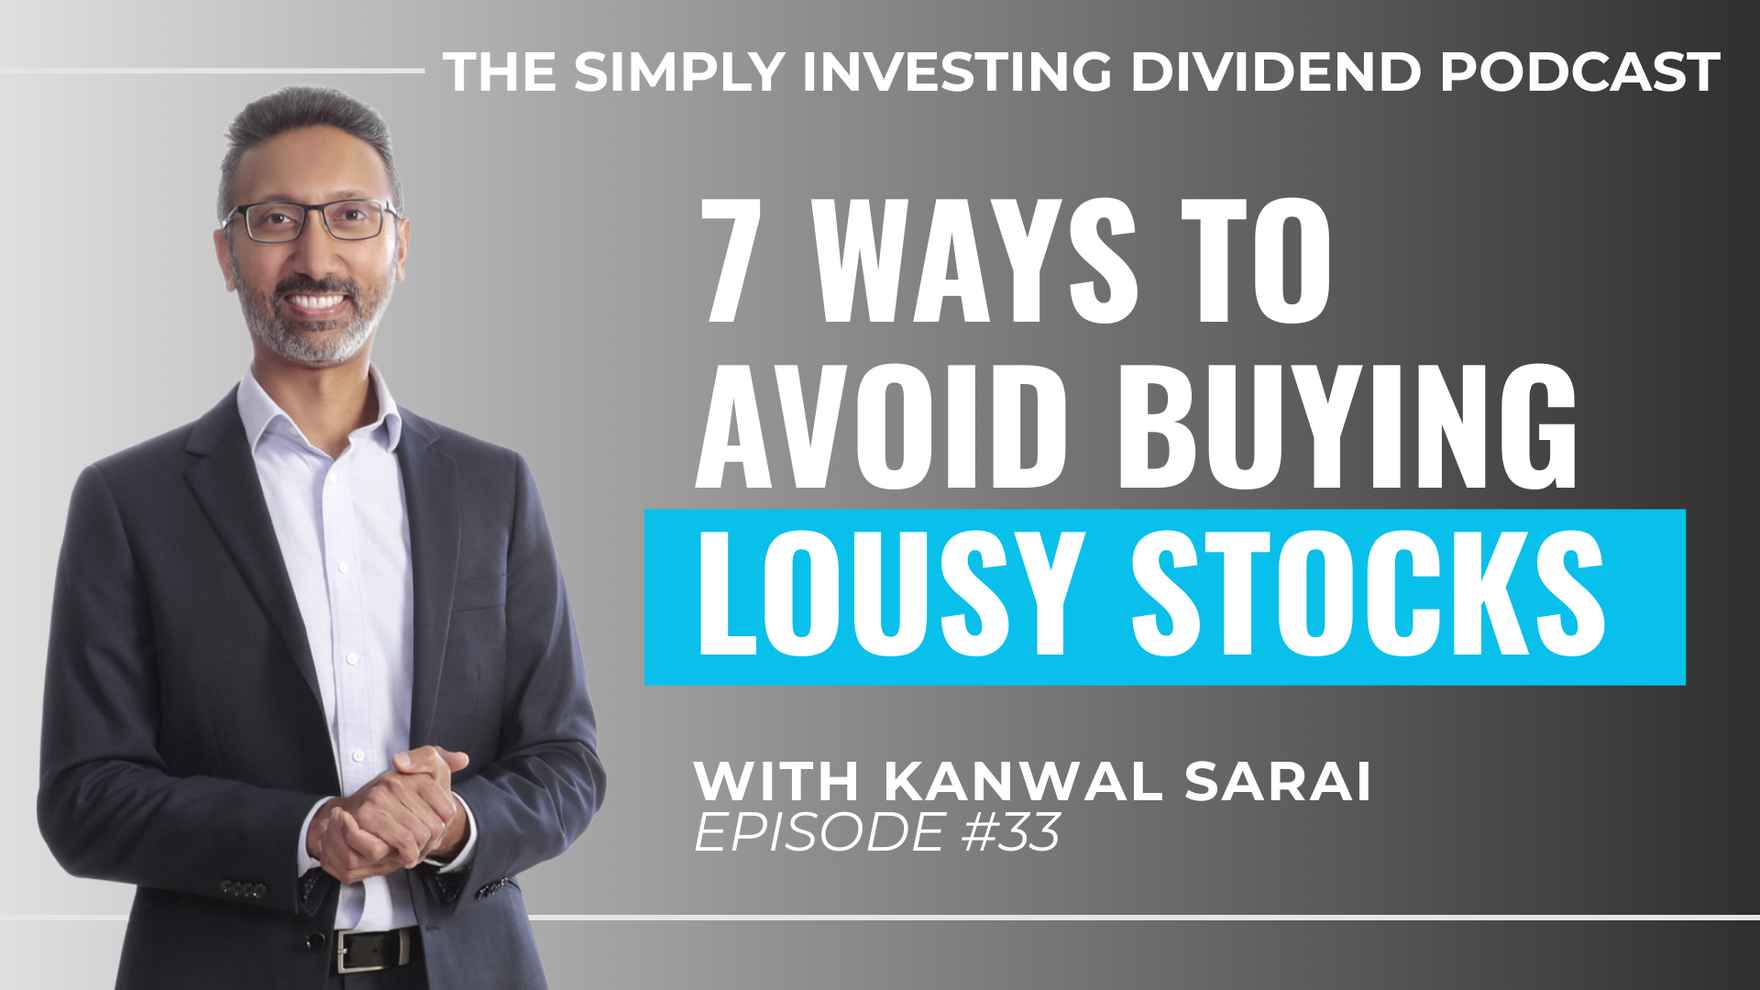 Simply Investing Dividend Podcast Episode 33 - 7 Ways to Avoid Investing in Lousy Stocks